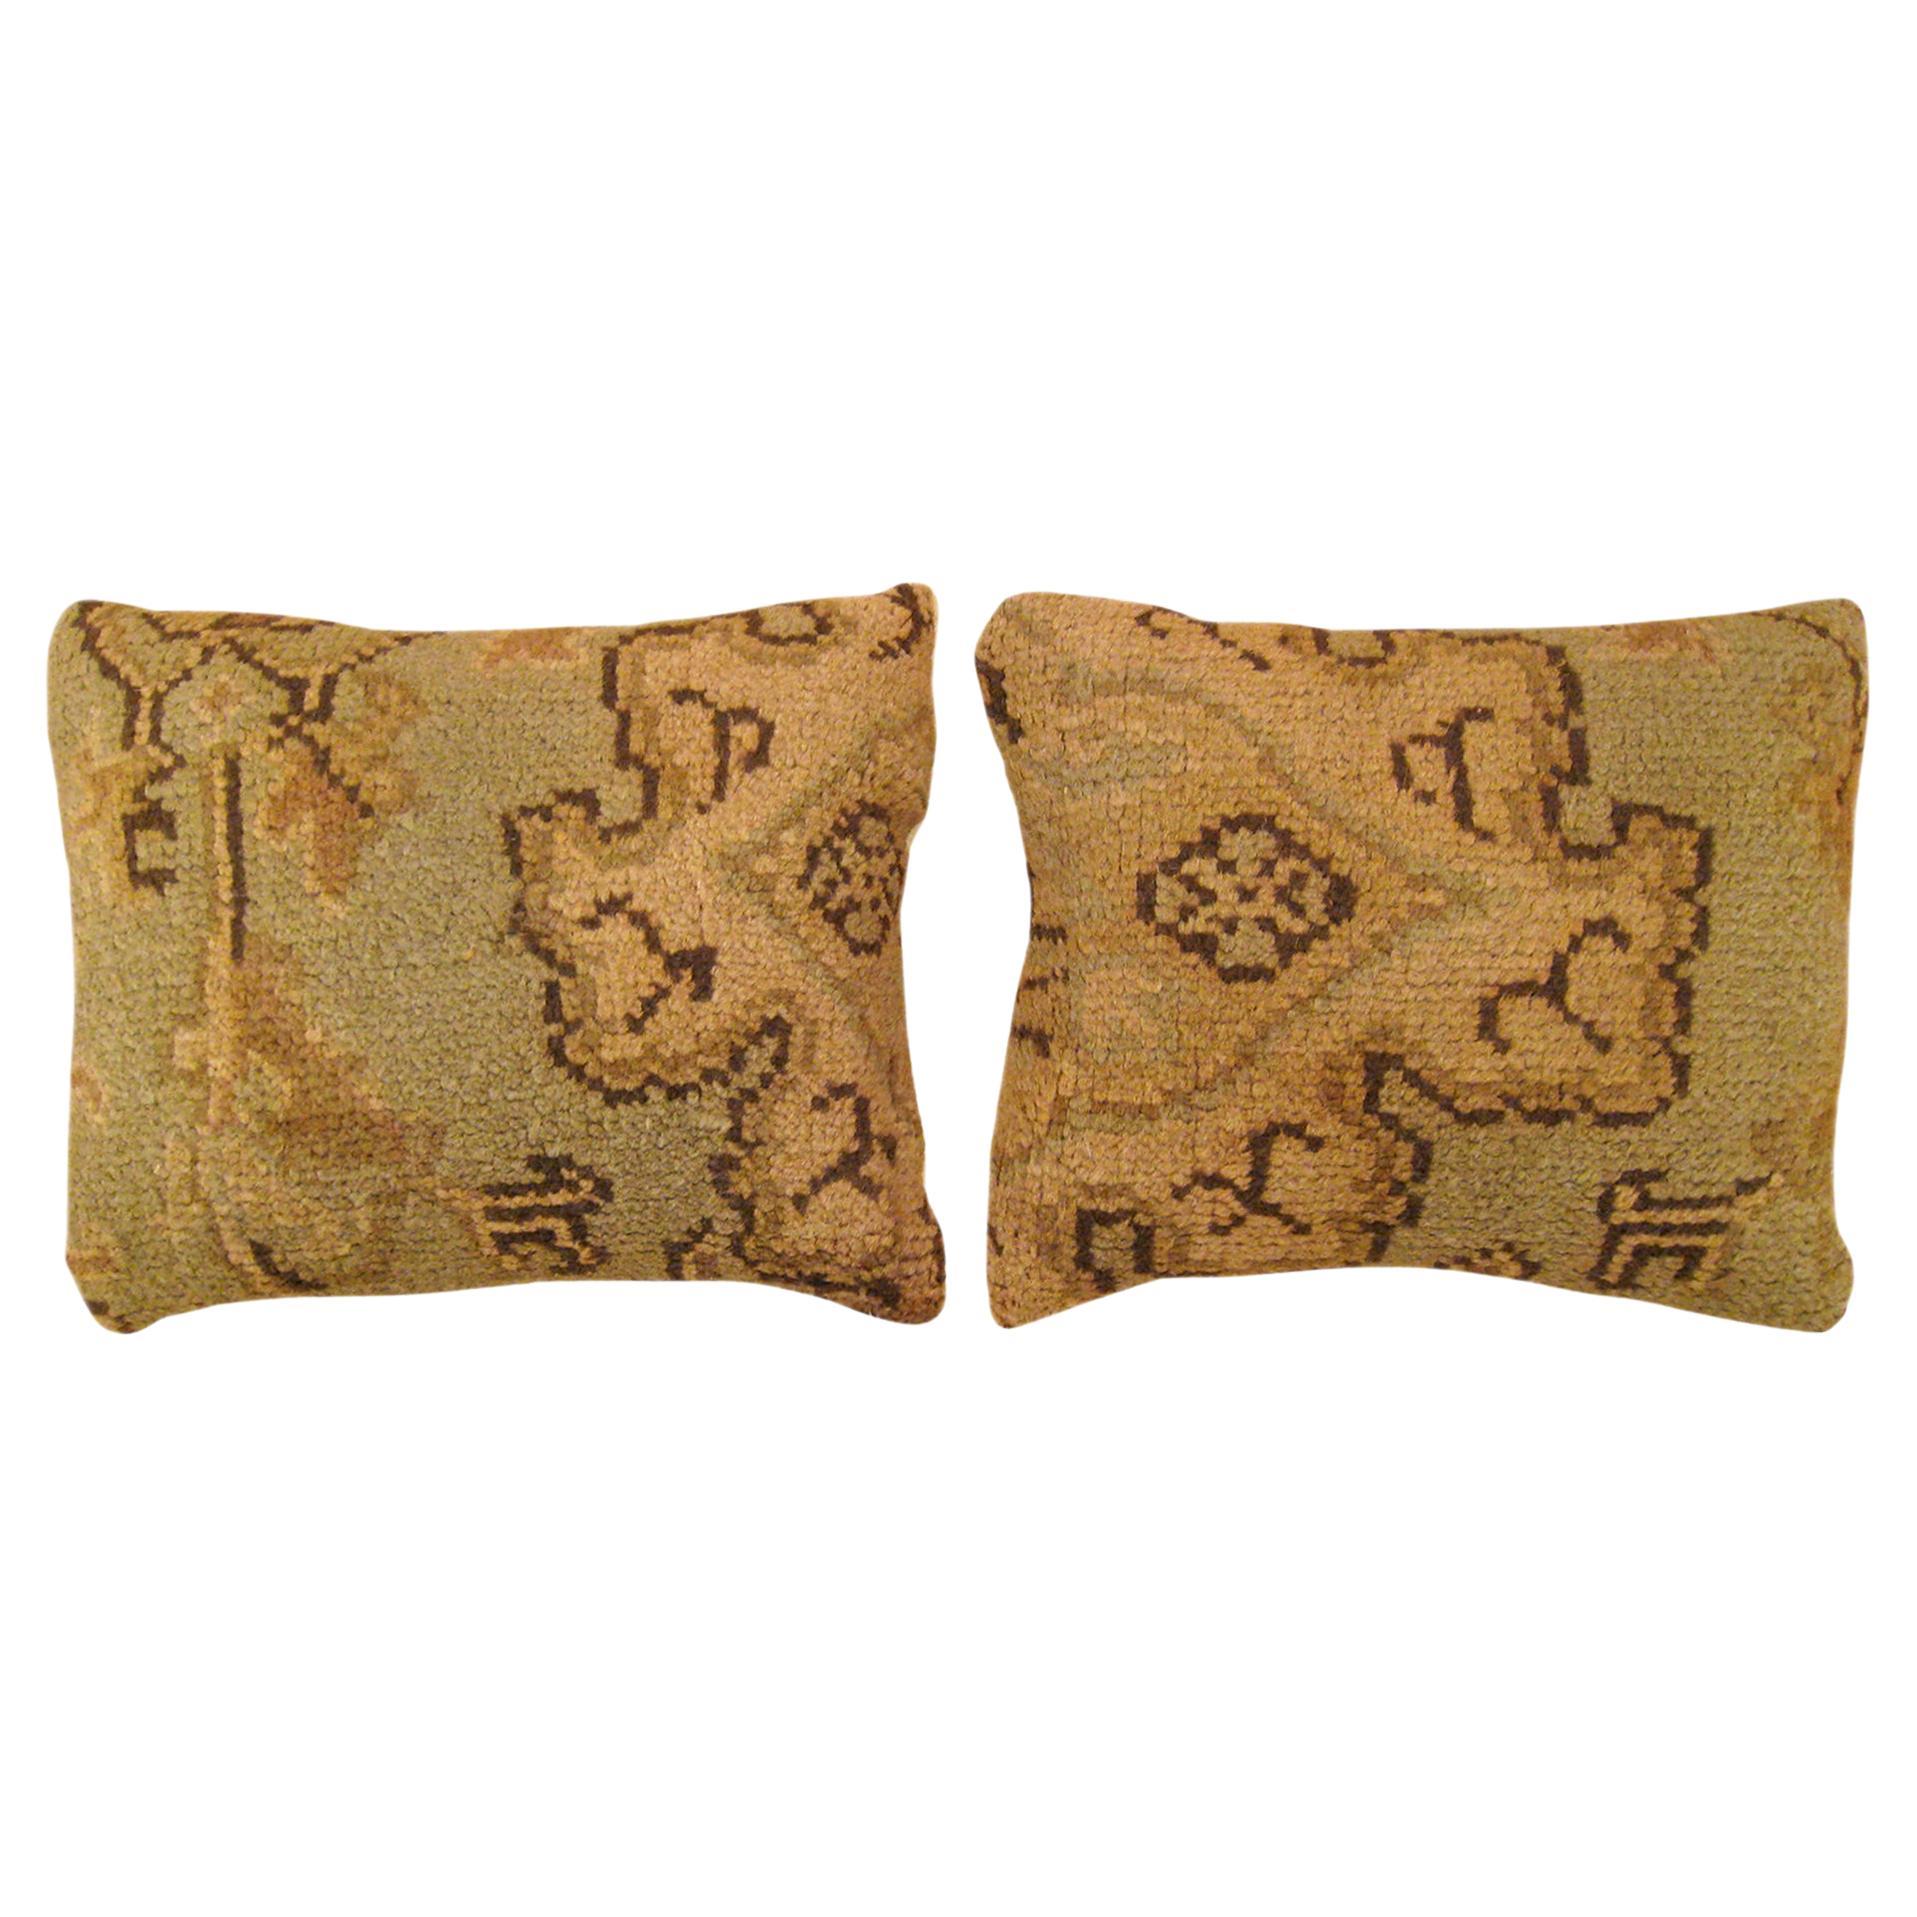 Pair of Decorative Antique Spanish Savonnerie Carpet Pillows with Geometric For Sale